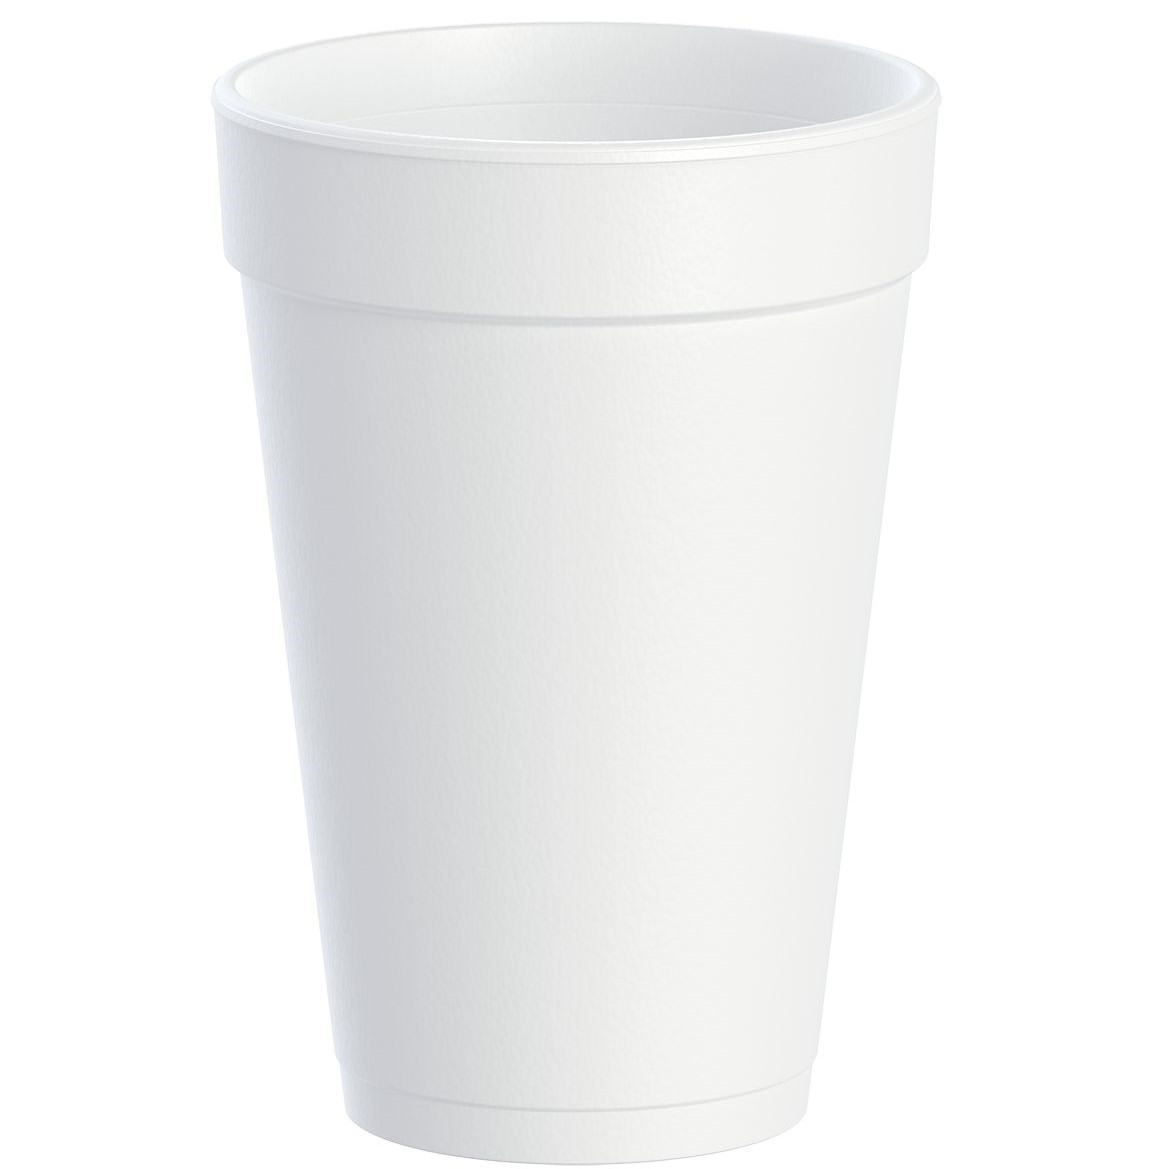  Tezzorio (200 Count) 16 oz White Foam Cups, Foam Drinking Cups,  Disposable Insulated Foam Cups for Hot/Cold Drinks : Health & Household